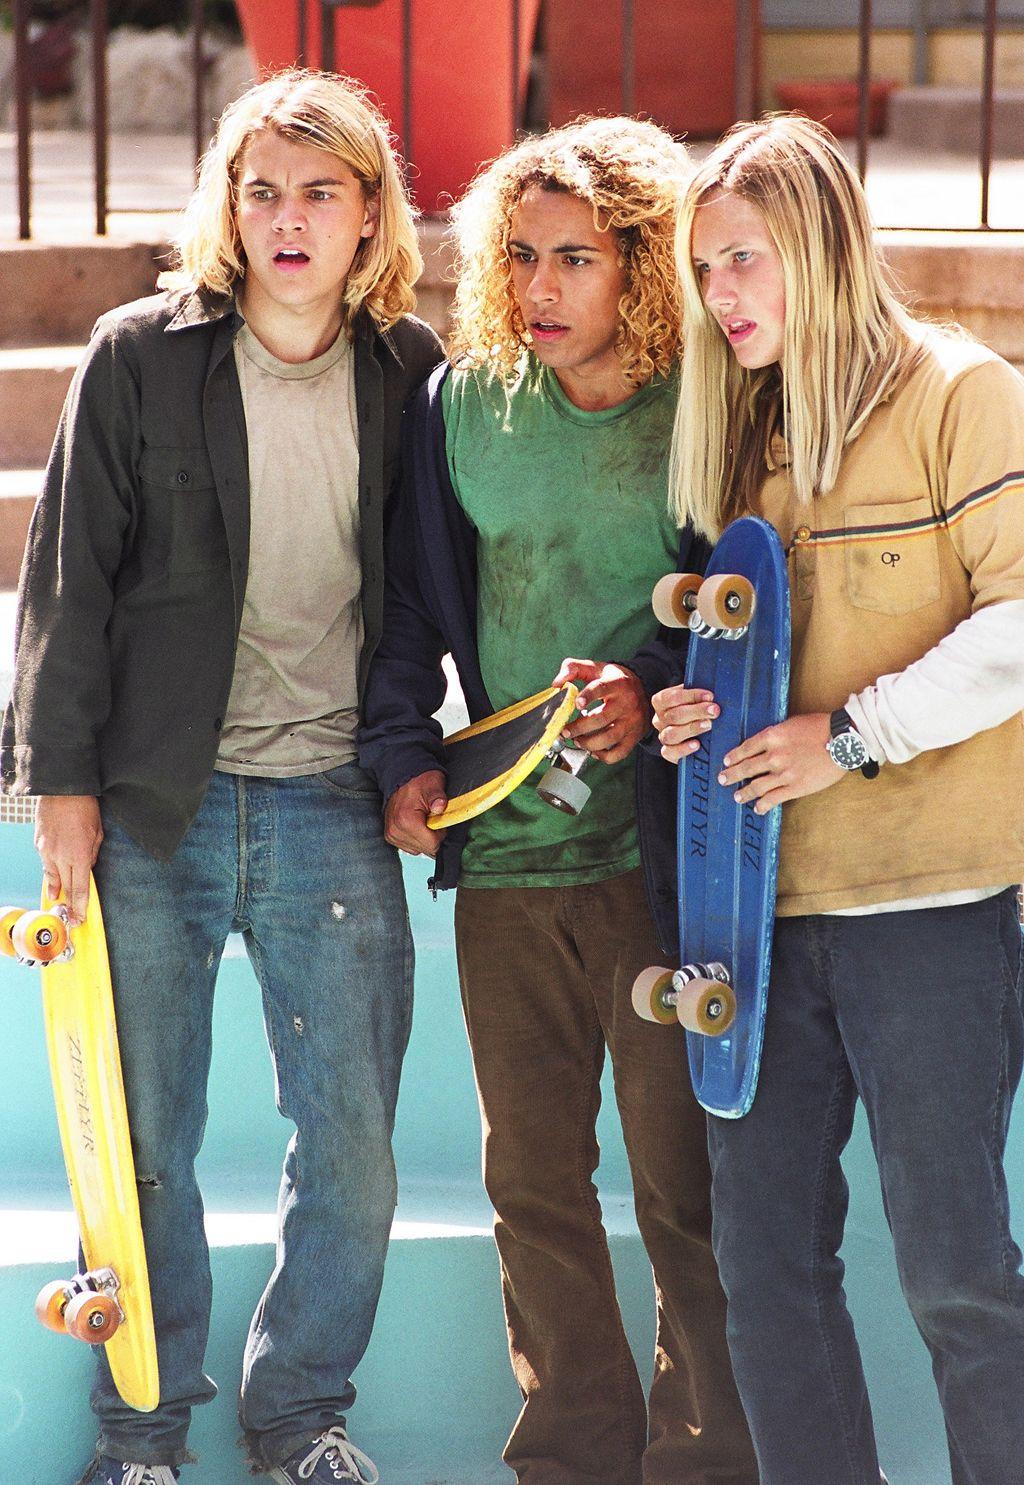 Lords Of Dogtown: Actors Portraying Real Life Skateboarding